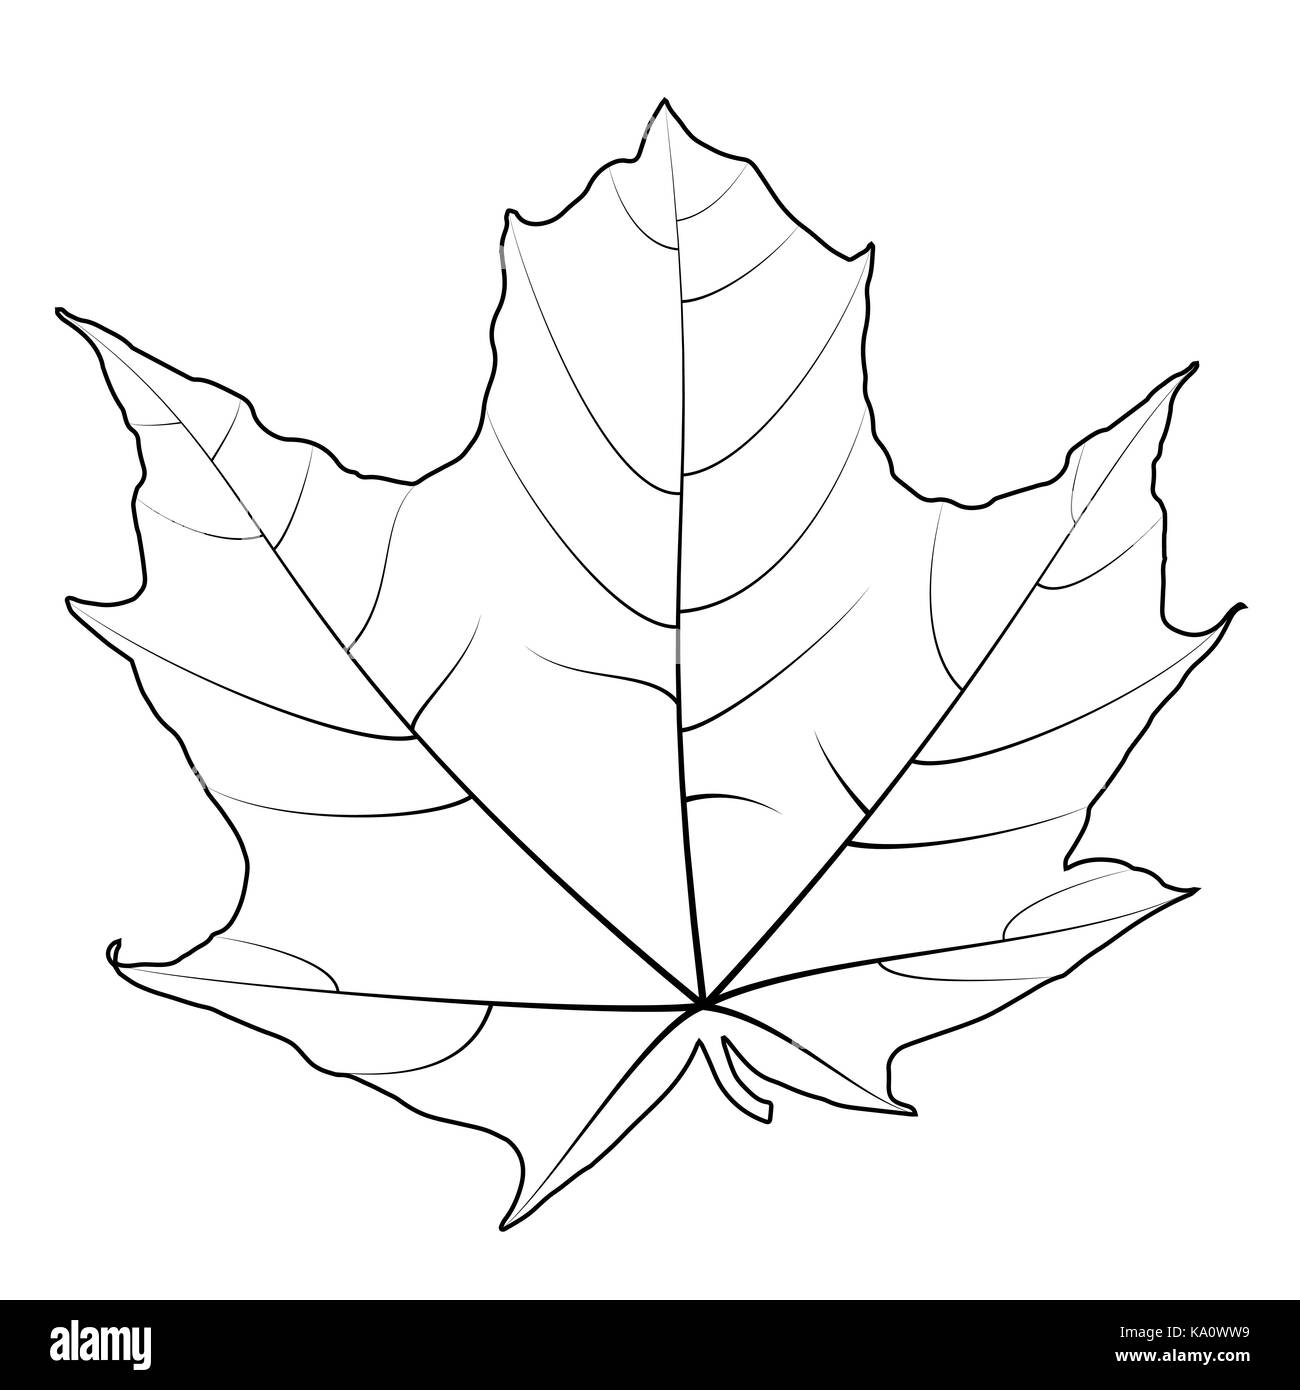 Maple Leaf Isolated on White Background. Vector Illustration. Stock Vector